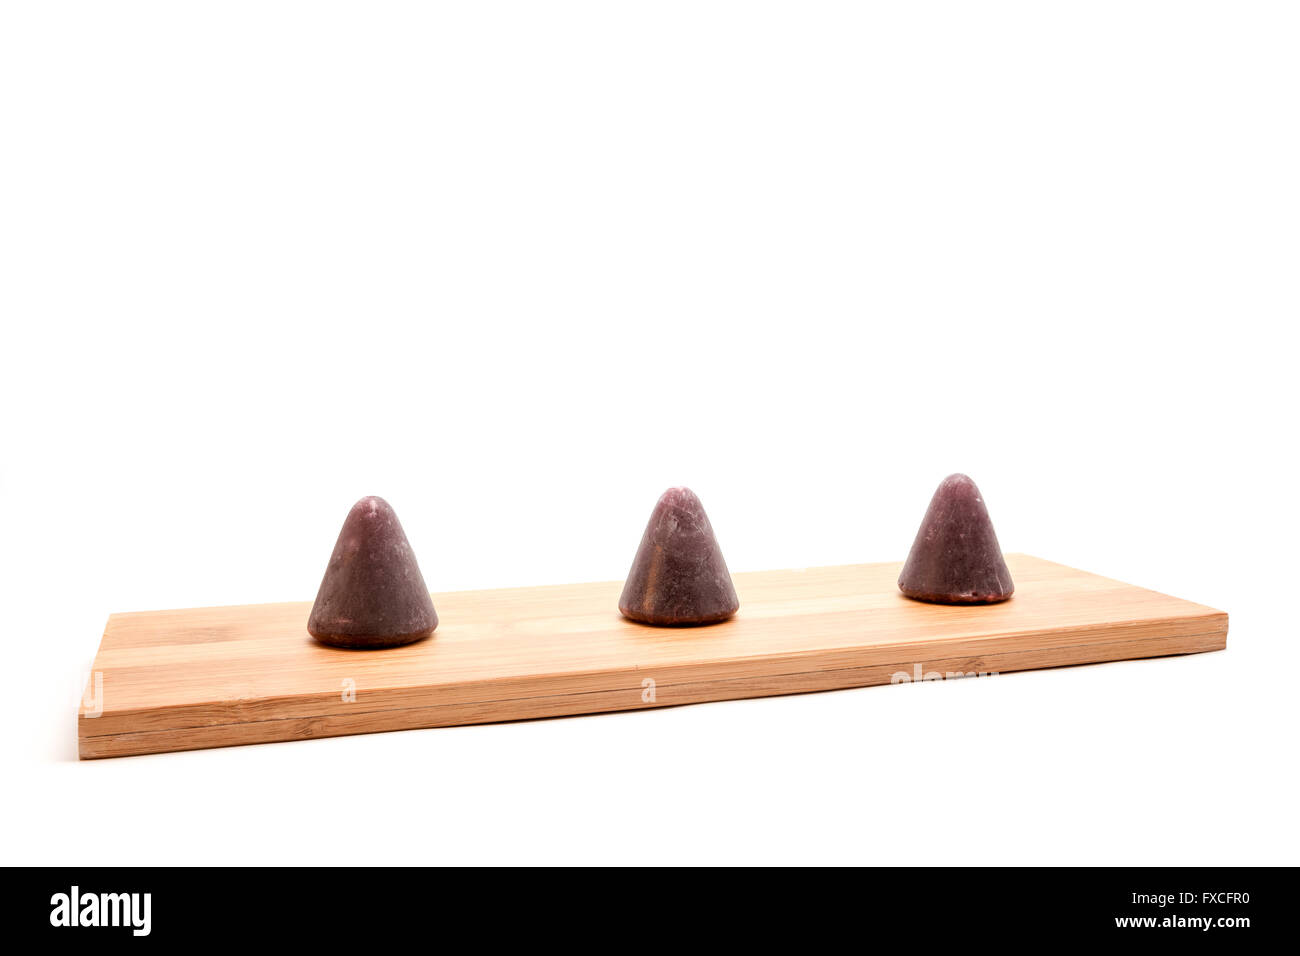 This pyramid shape of an cuberdons is a very tasty candy from Ghent Stock Photo